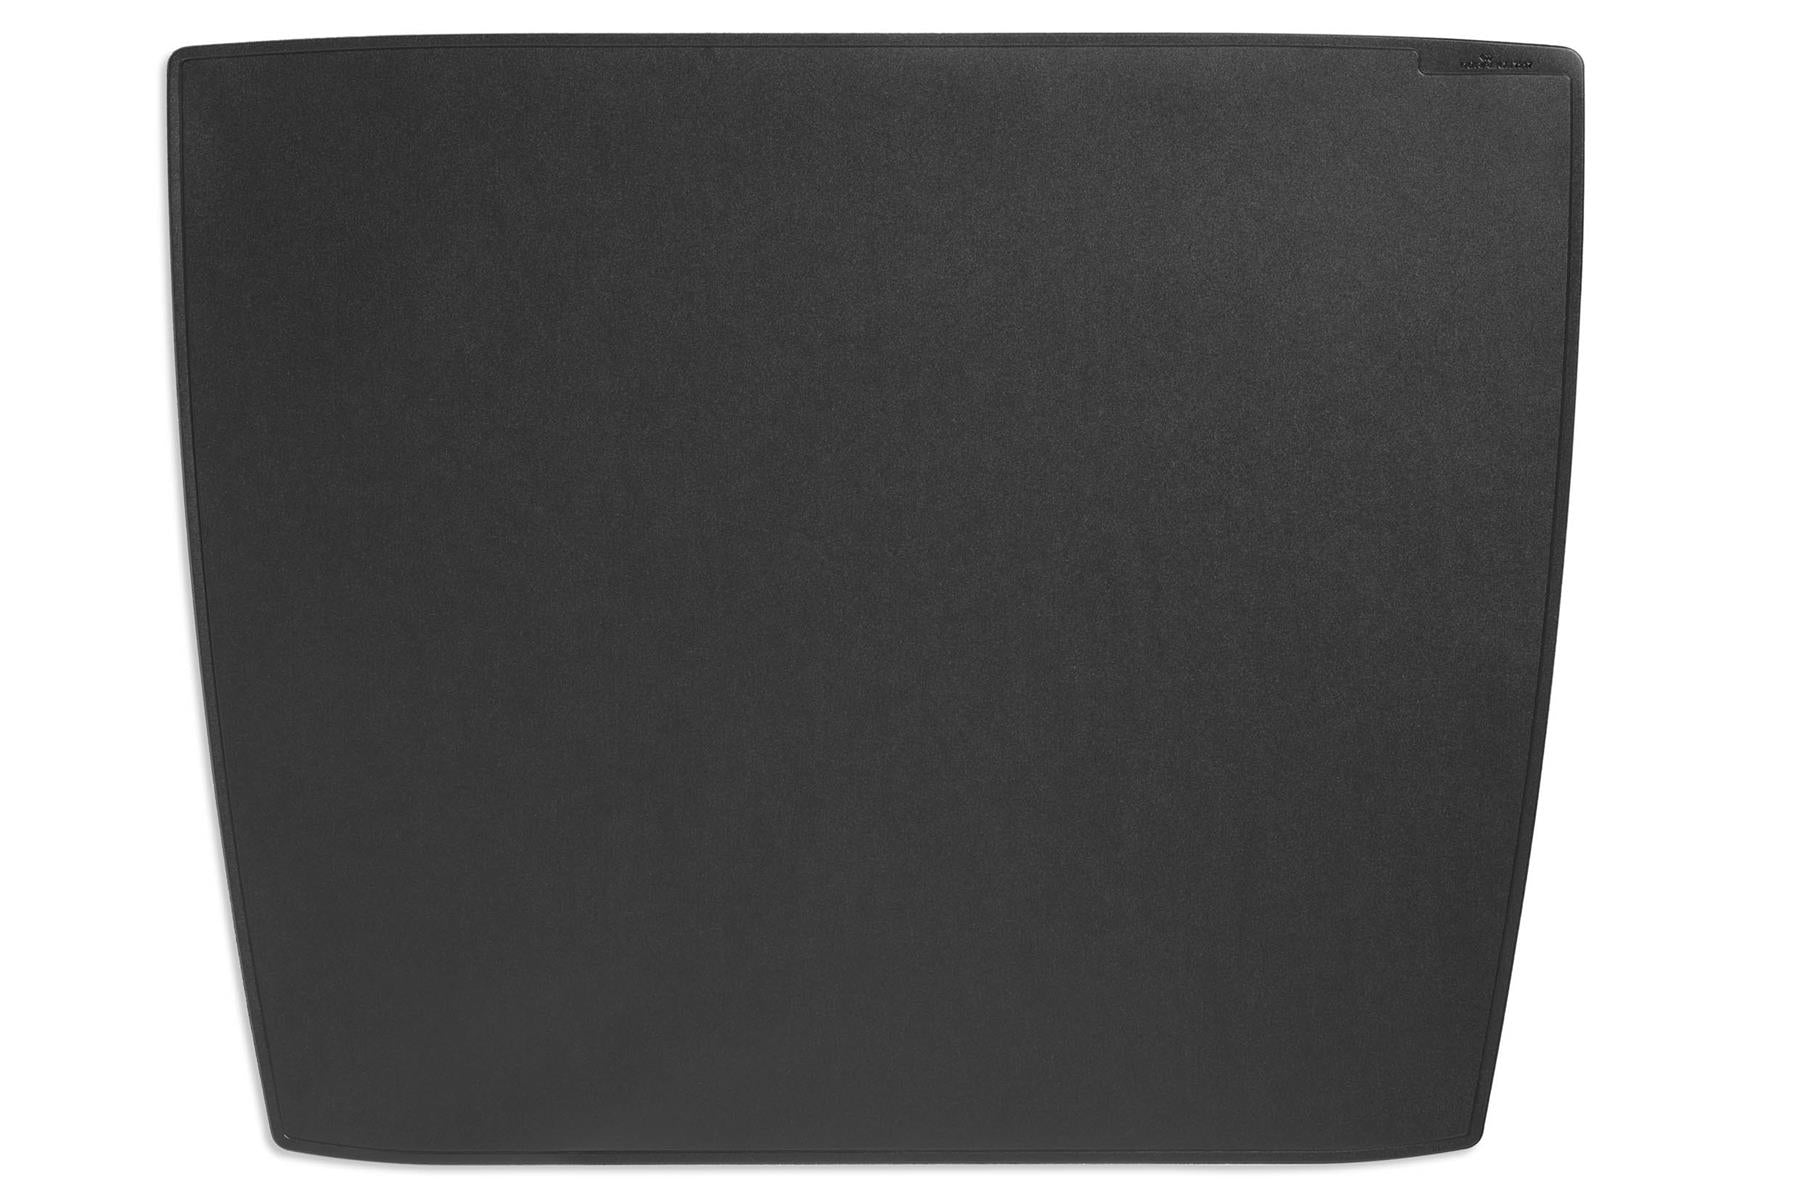 Durable Smooth Non-Slip Desk Mat PC Keyboard Mouse Pad | 65 x 52 cm | Black